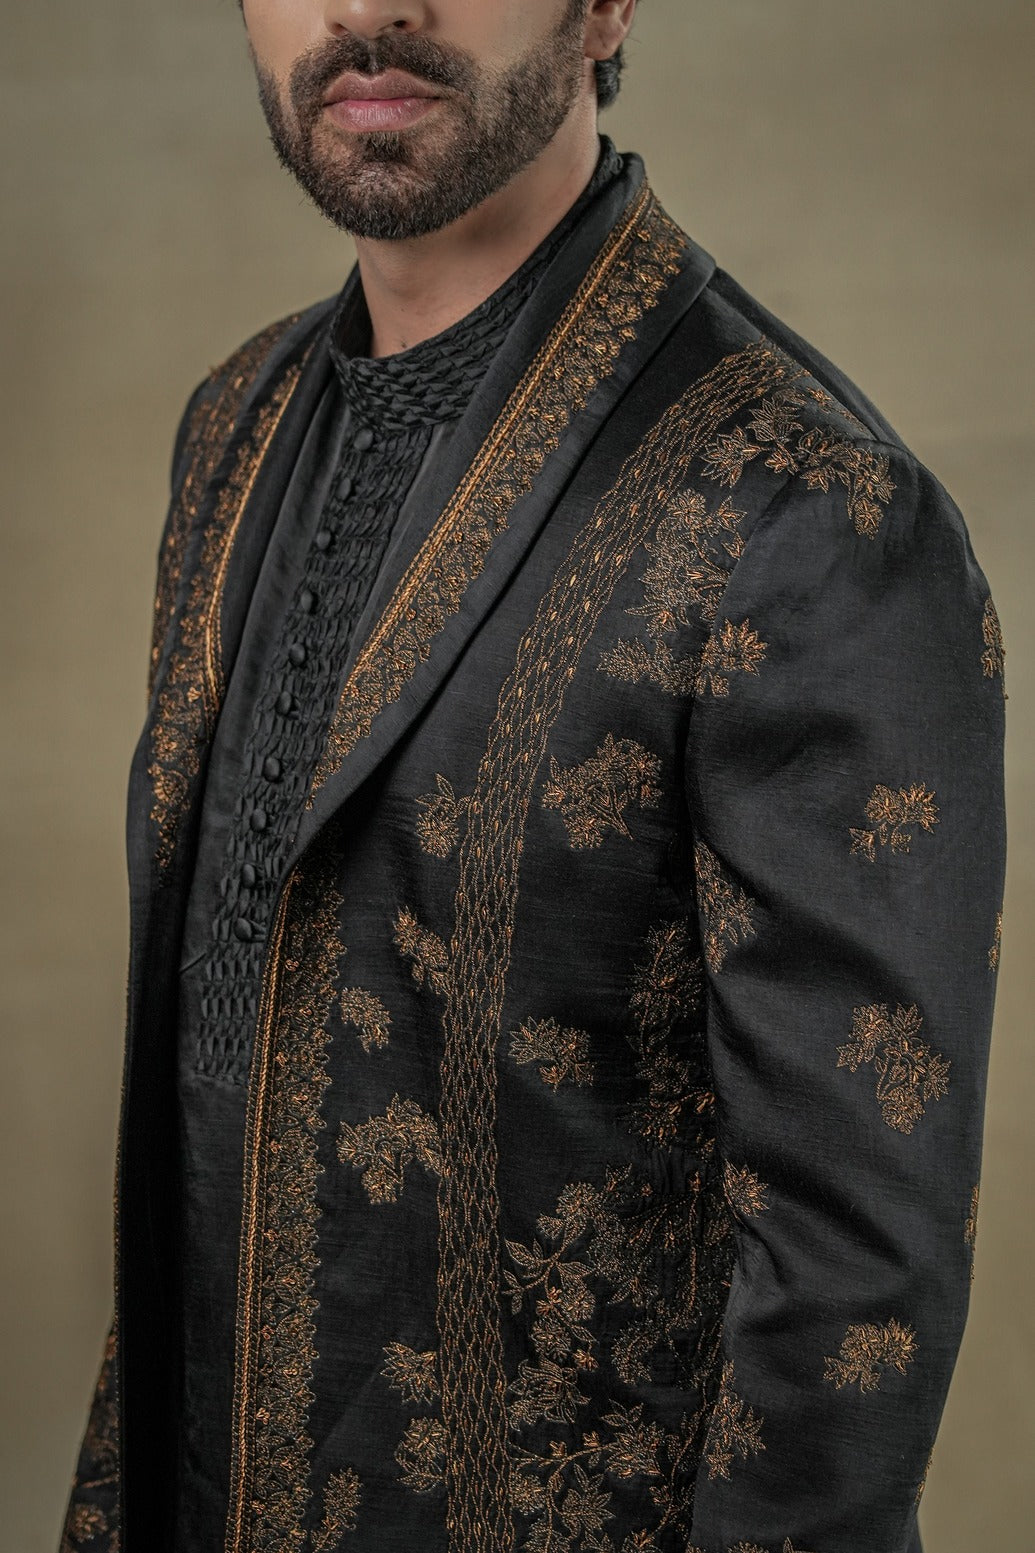 all-black short jacket set, elevated with exquisite gold zari work and a distinguished shawl collar lapel detail.